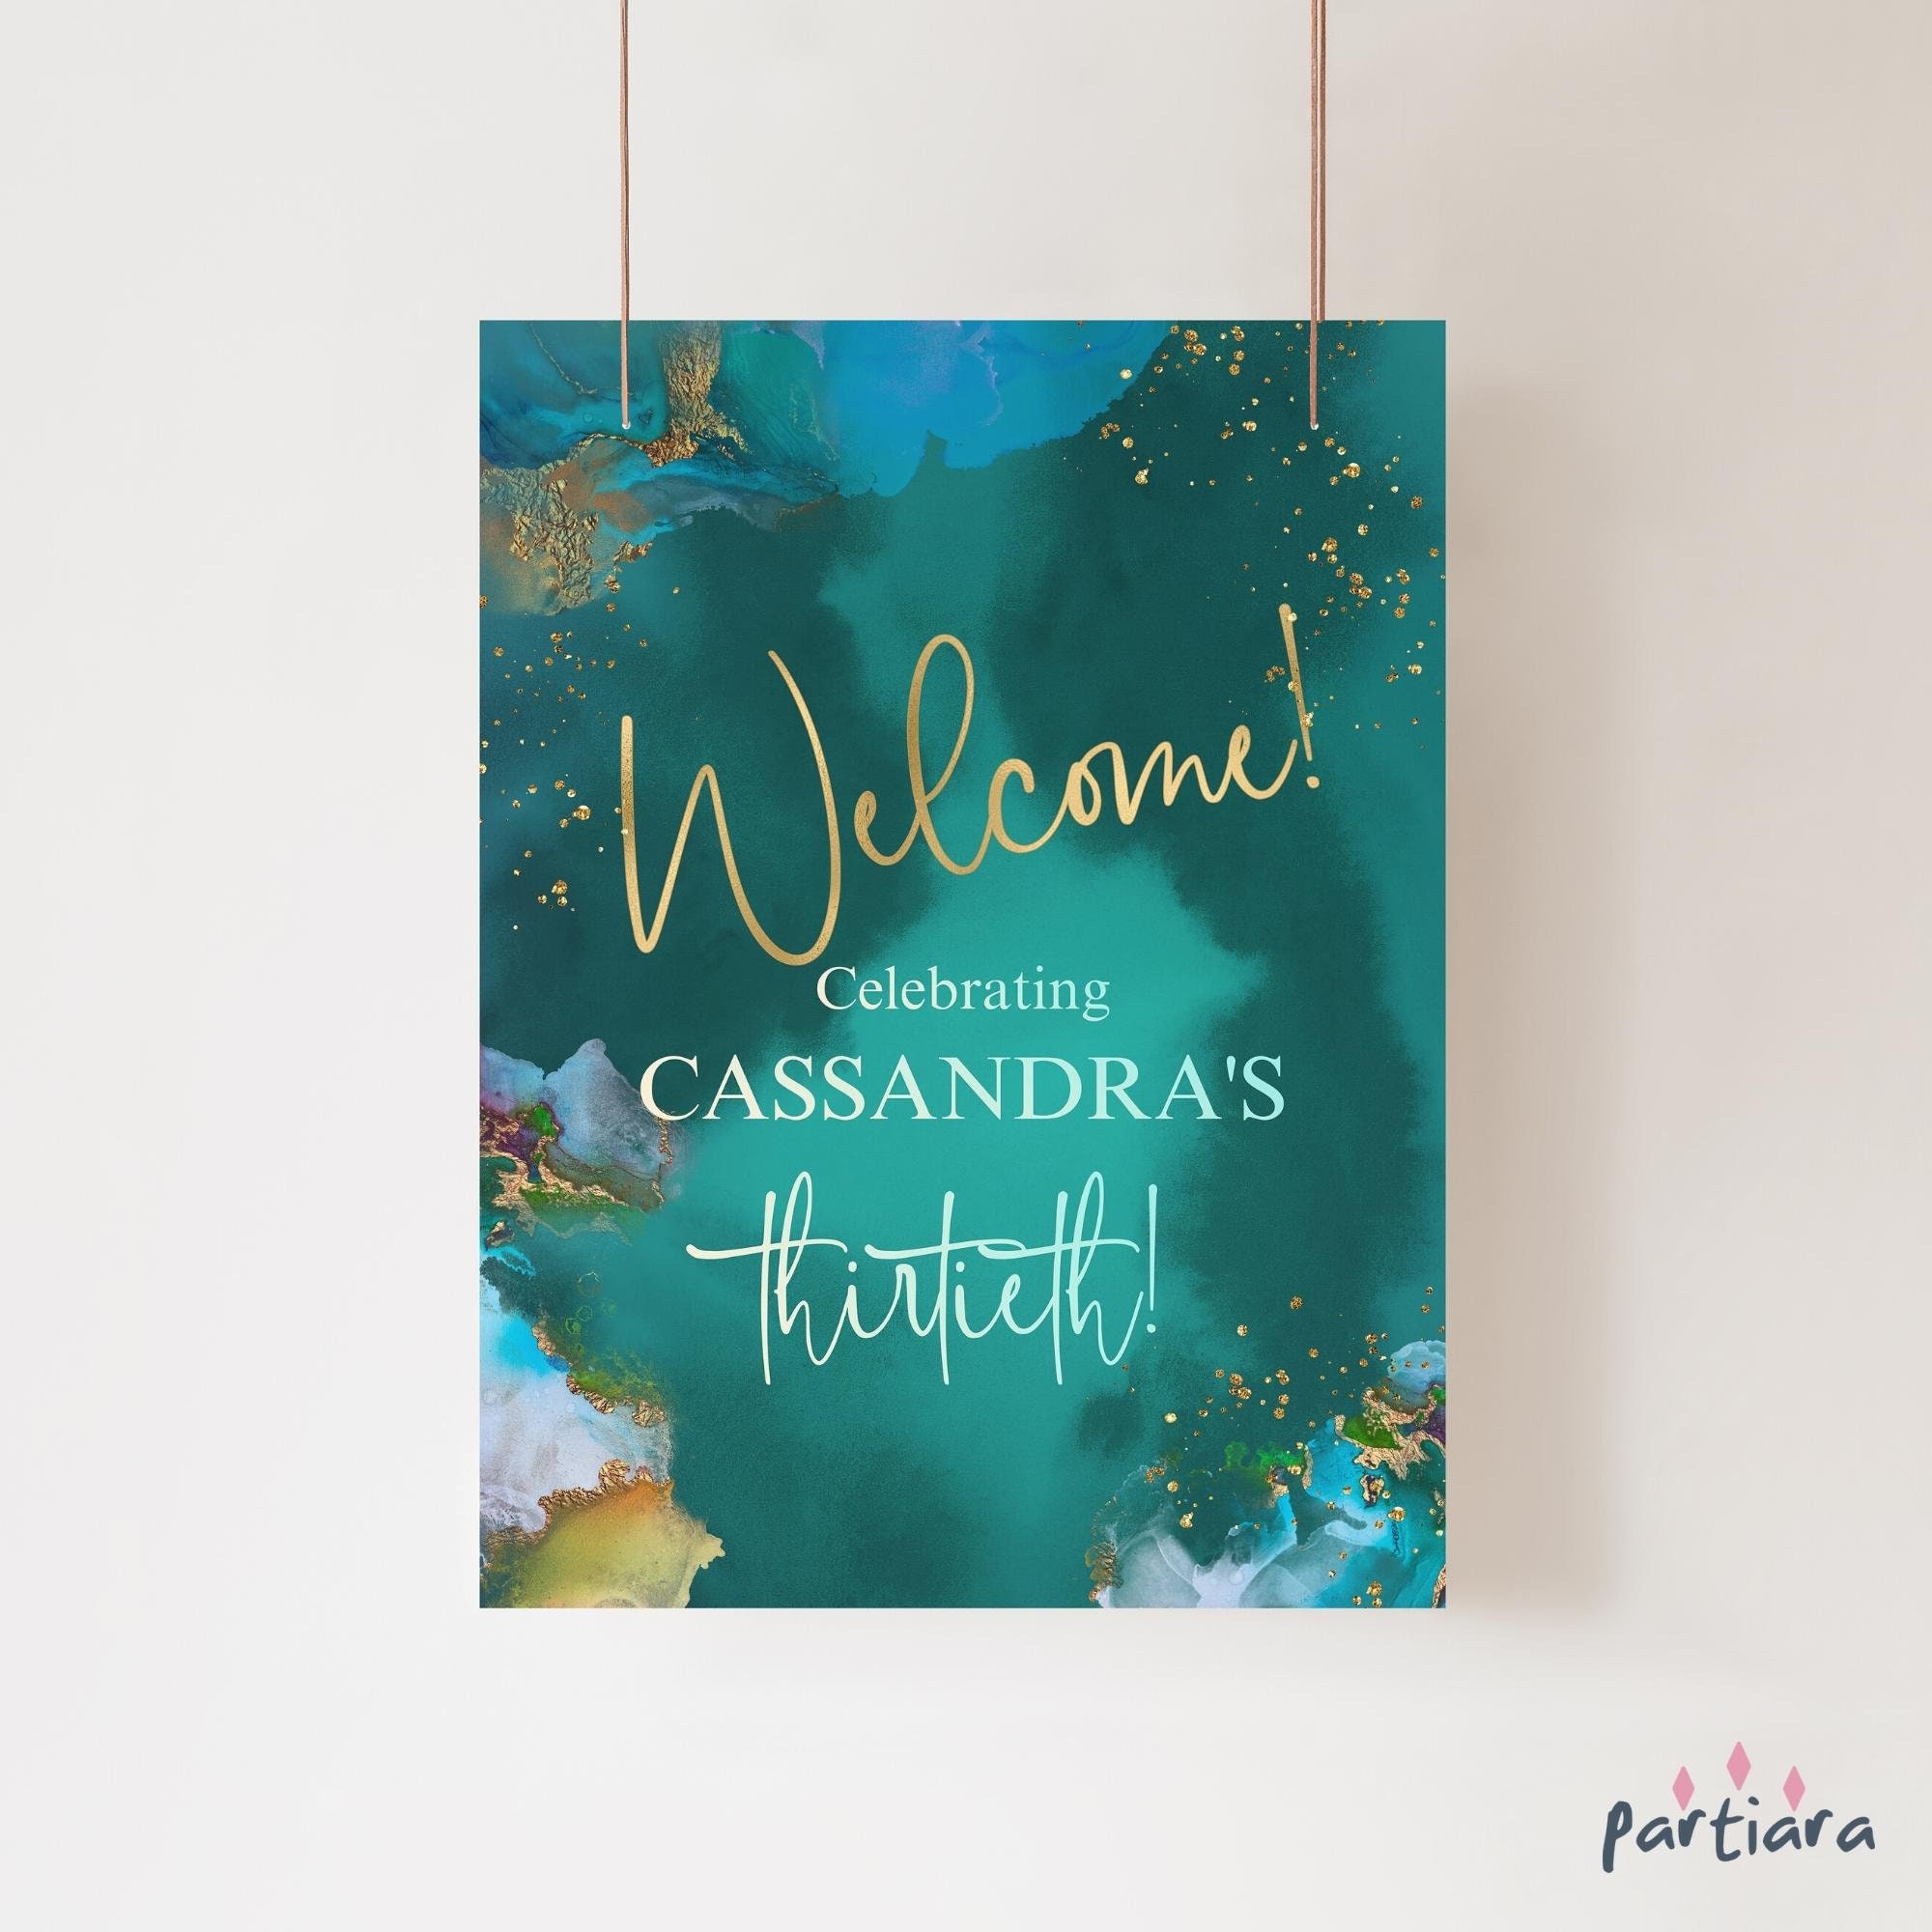 Wedding Welcome Sign, Turquoise – Lux Party